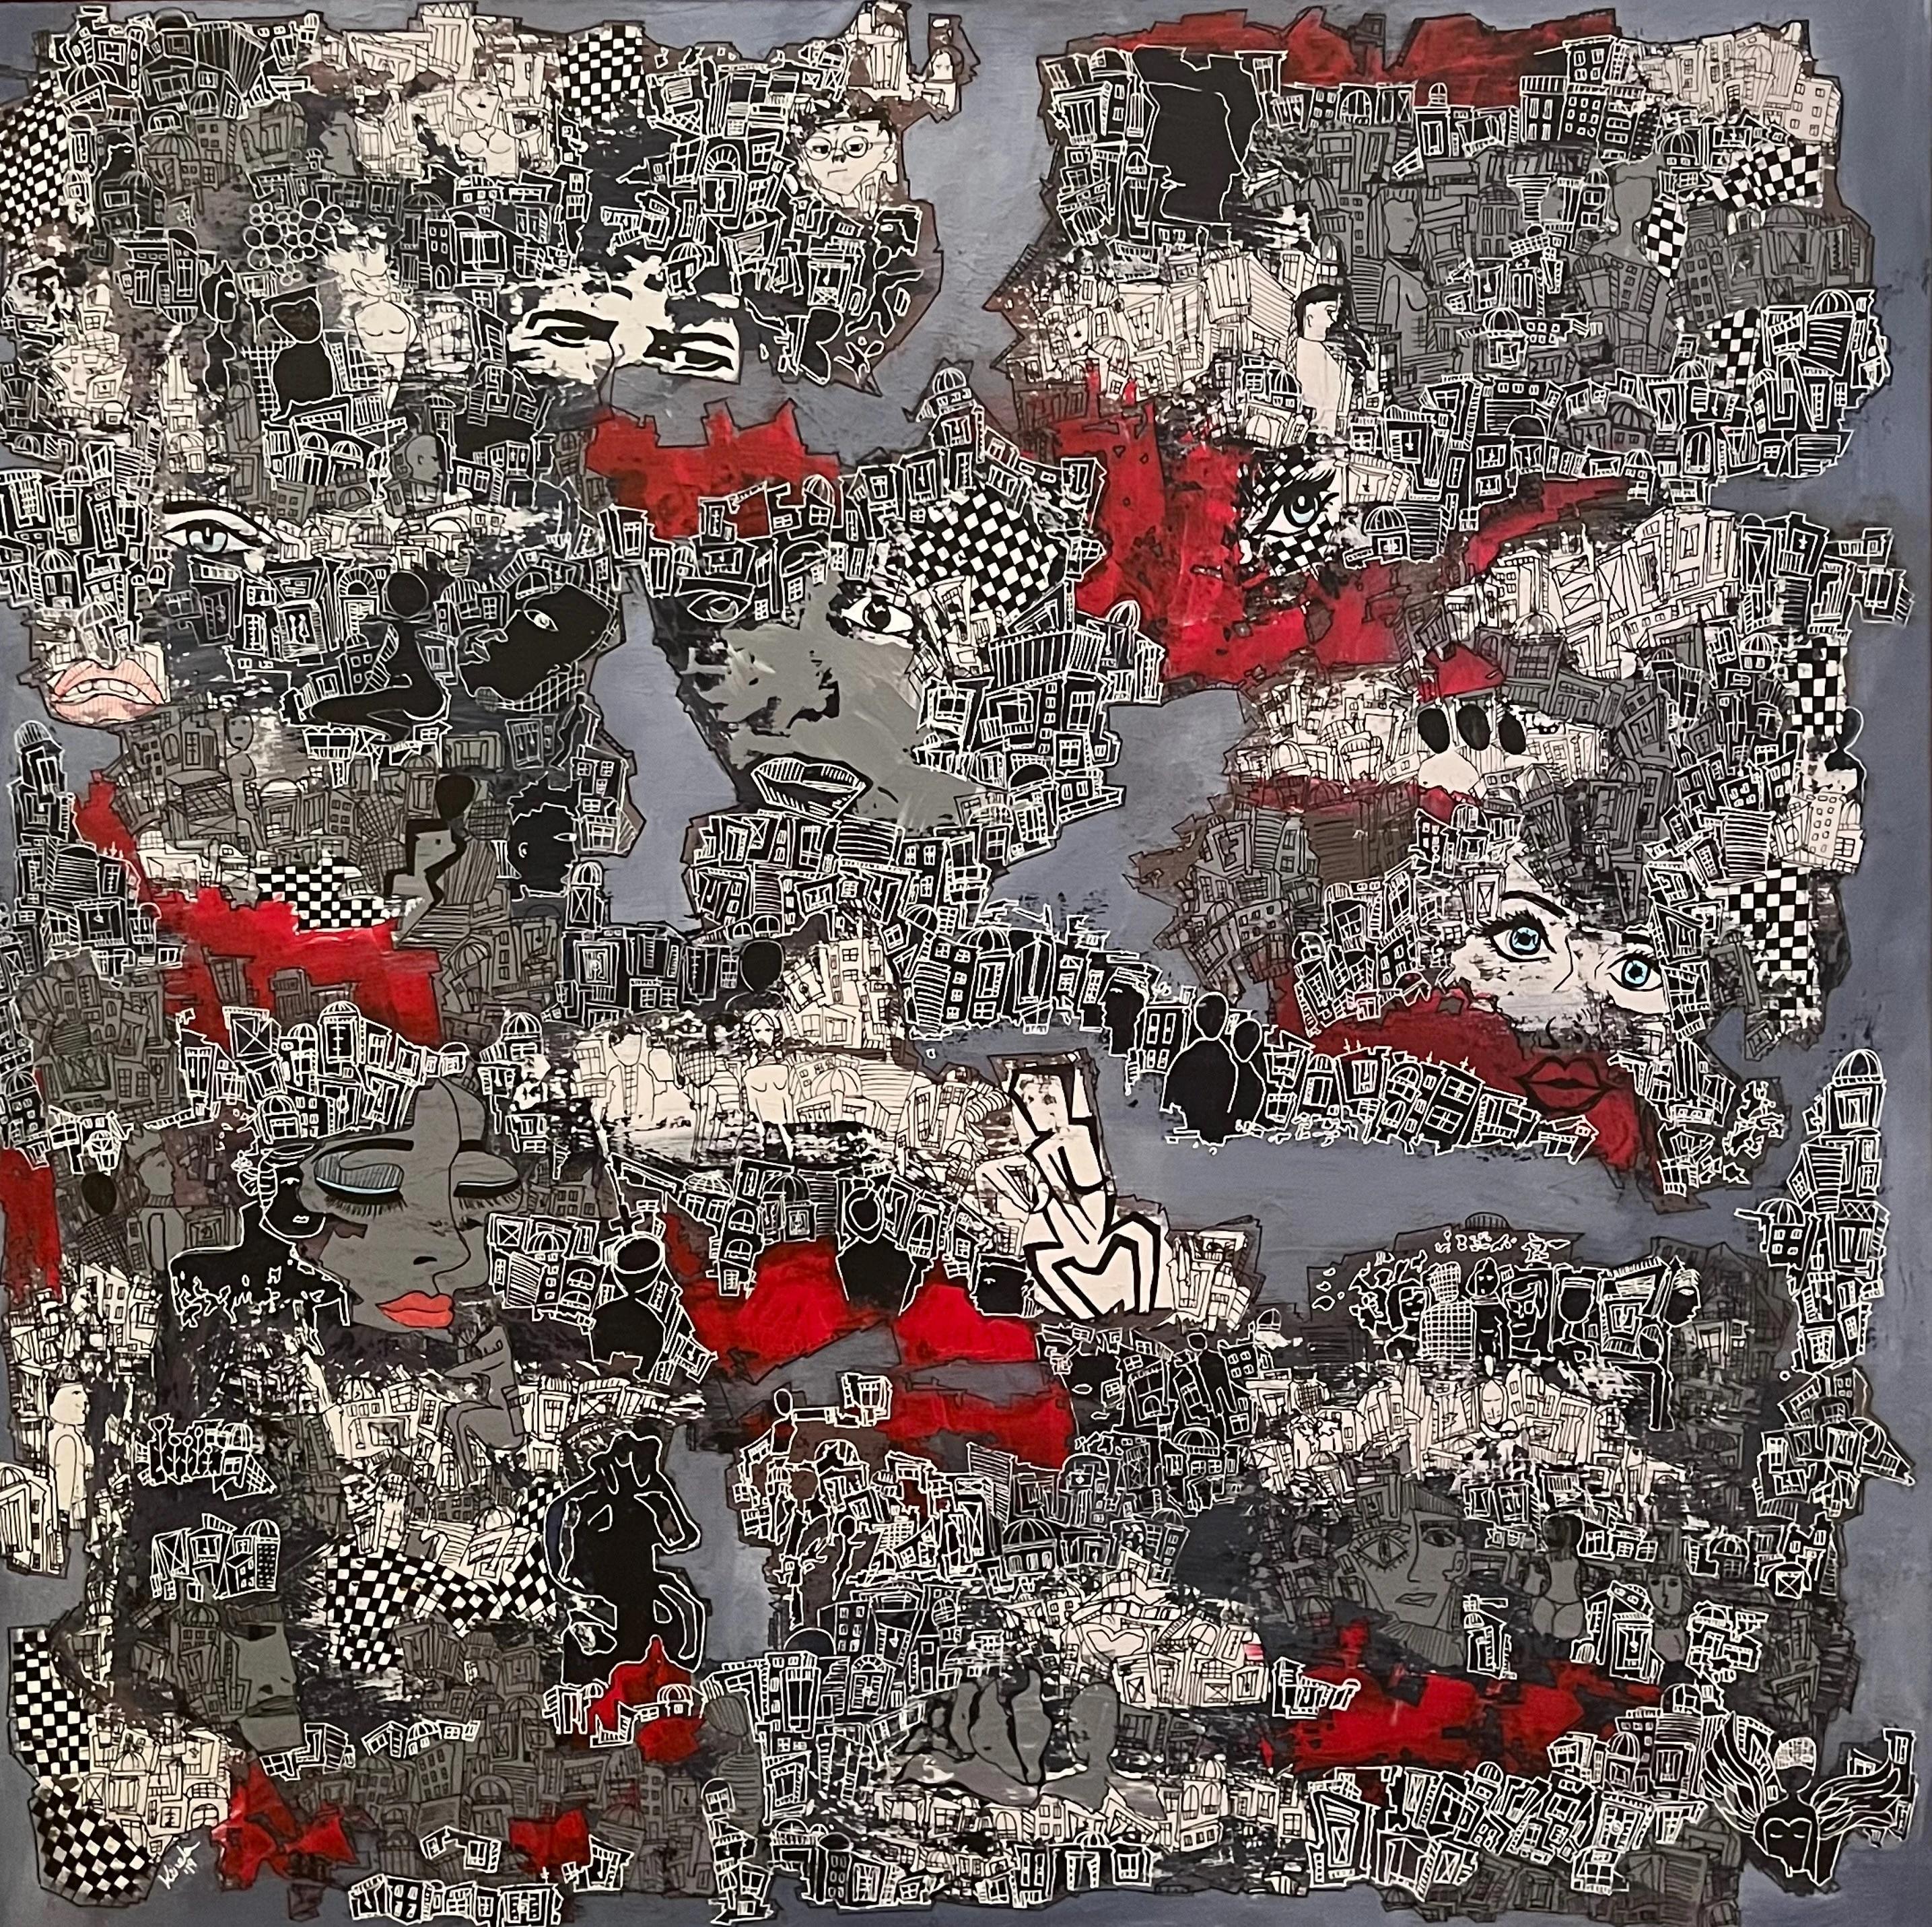 "Red Clouds" Acrylic & Inks Painting 39" x 39" inch by Kinda Adly